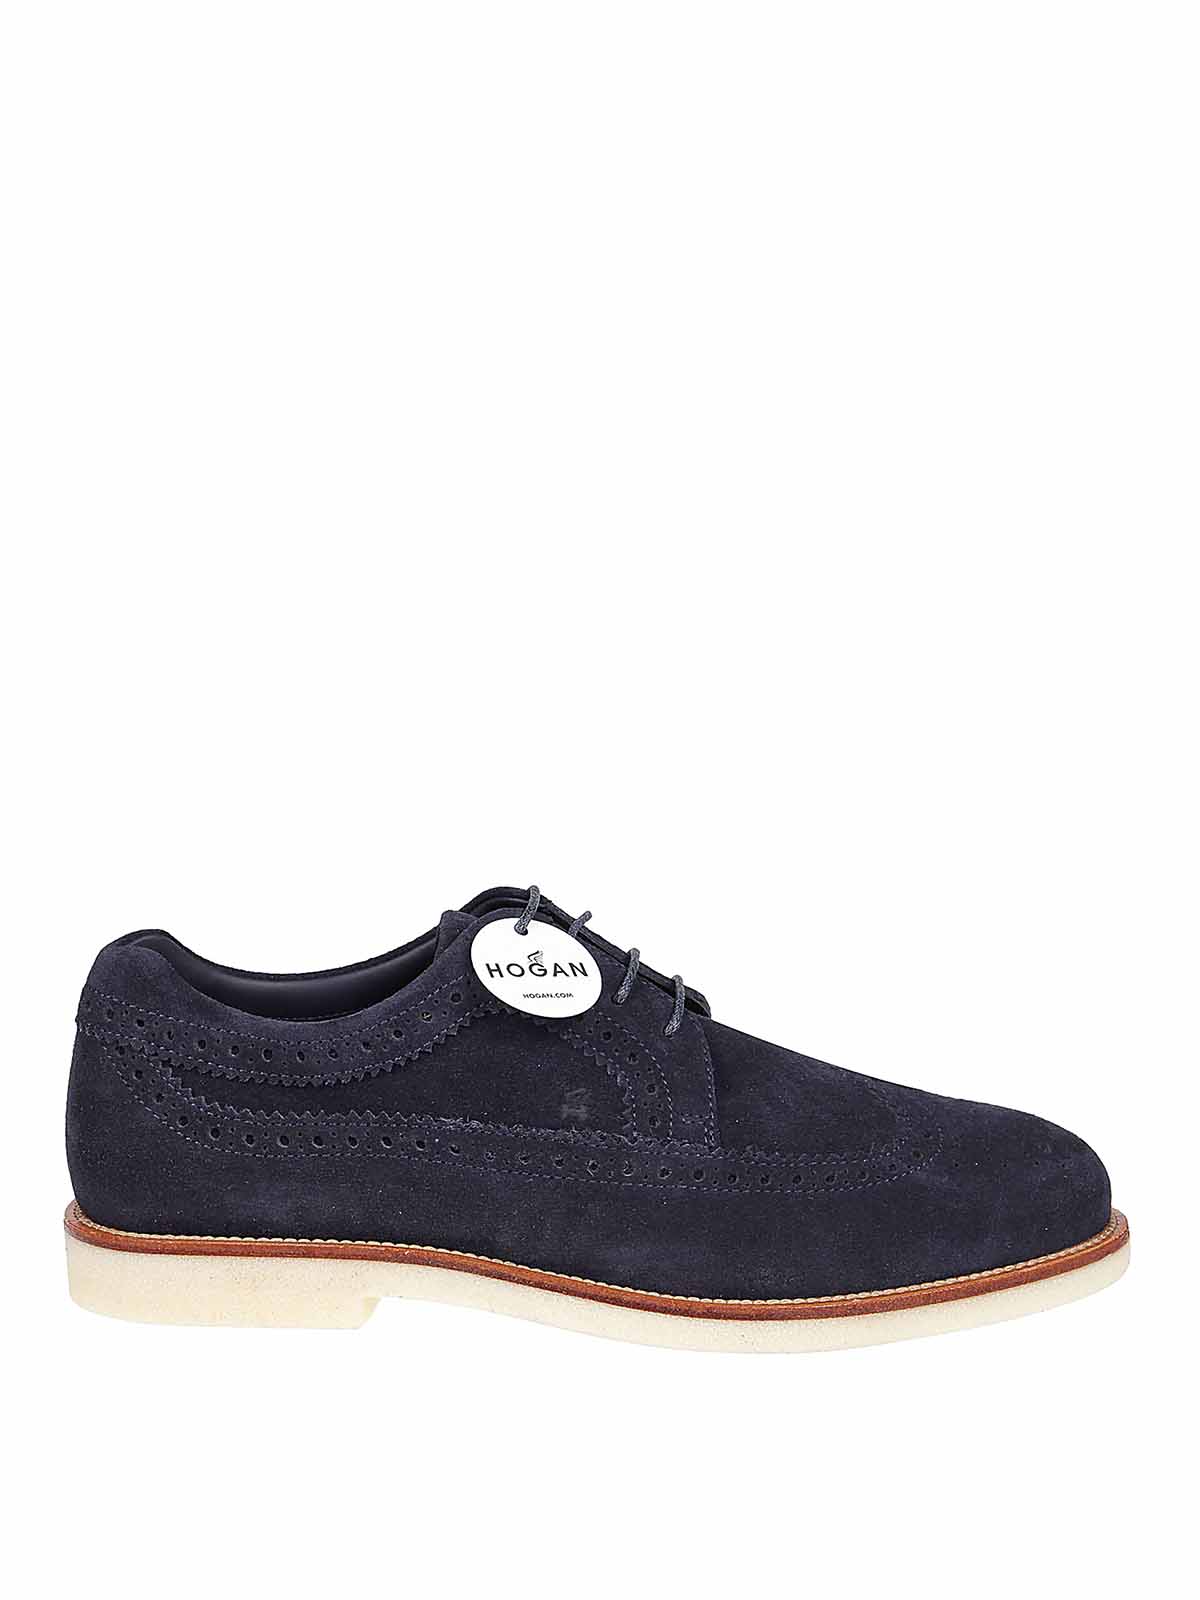 Mens Shoes Lace-ups Brogues Hogan H576 Derby In Suede in Blue for Men 